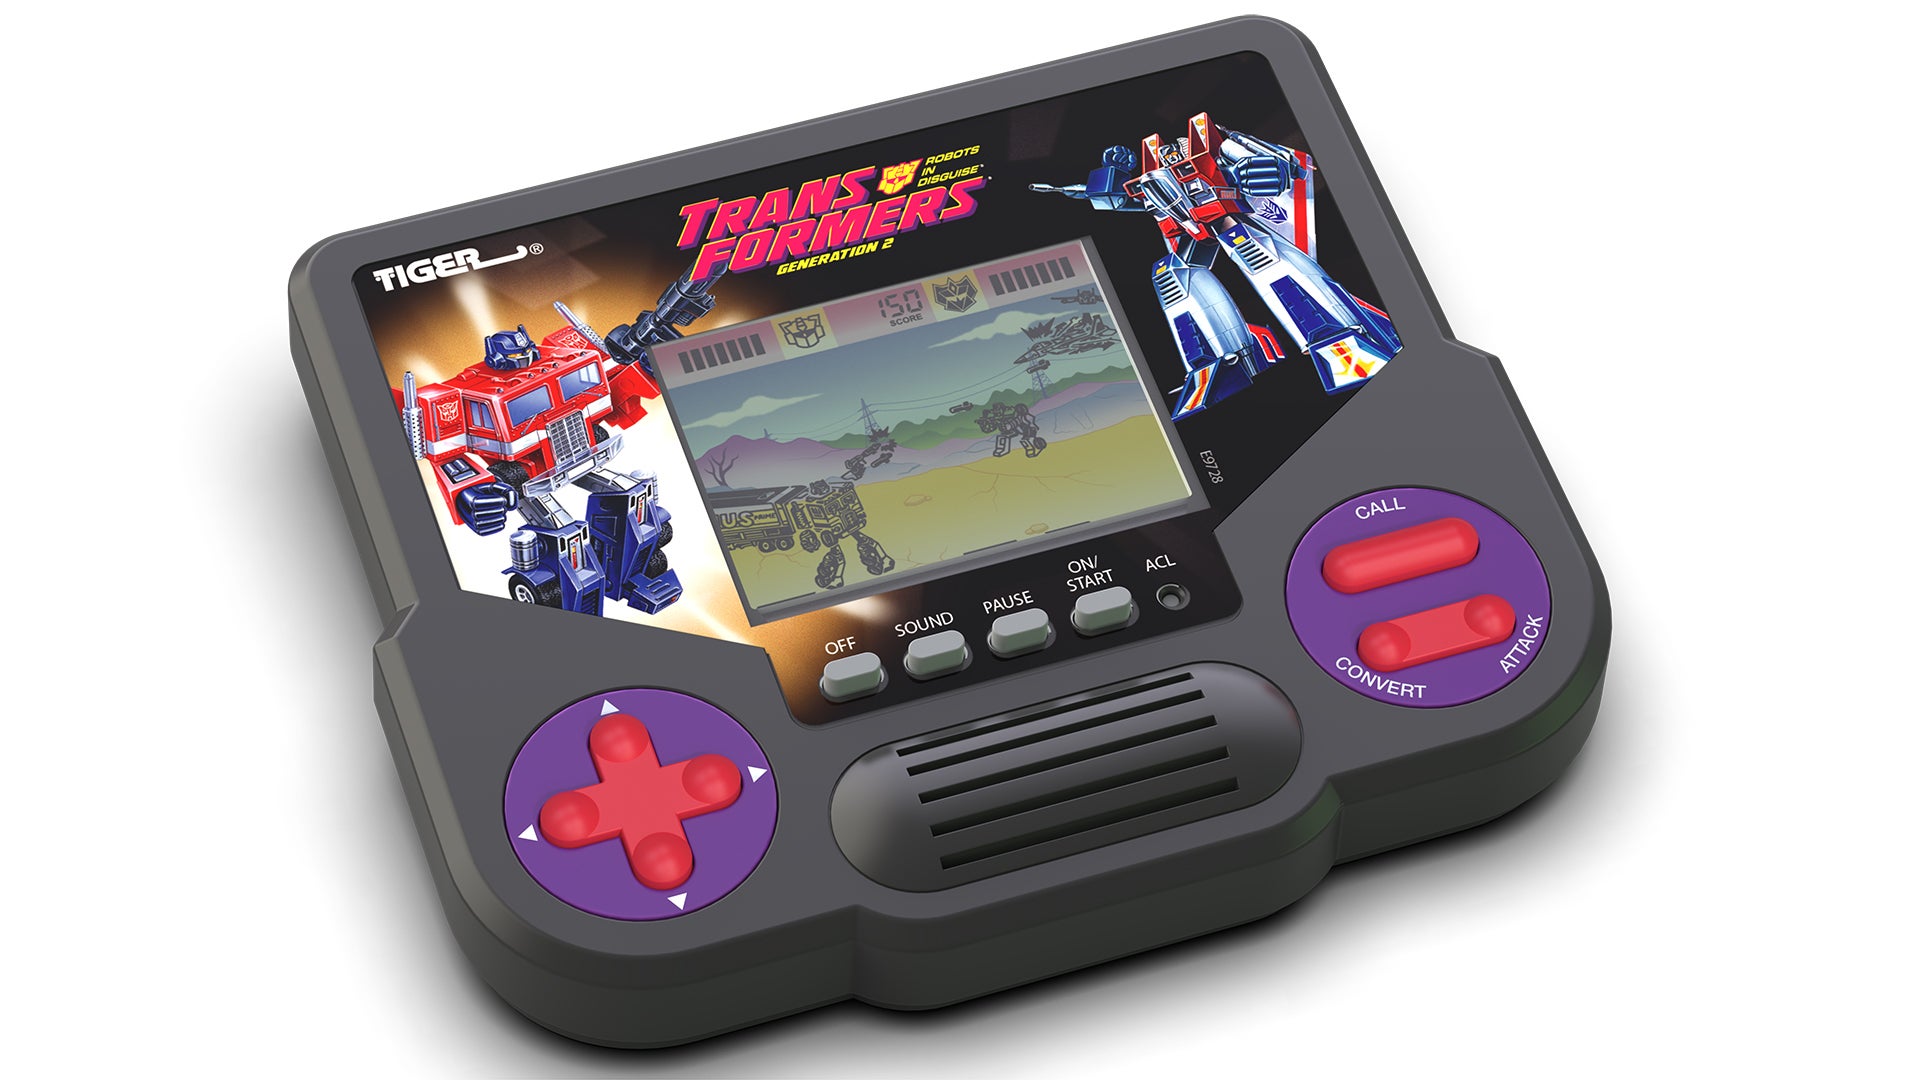 Those Cheap-Arse Tiger LCD Handheld Games Are Back